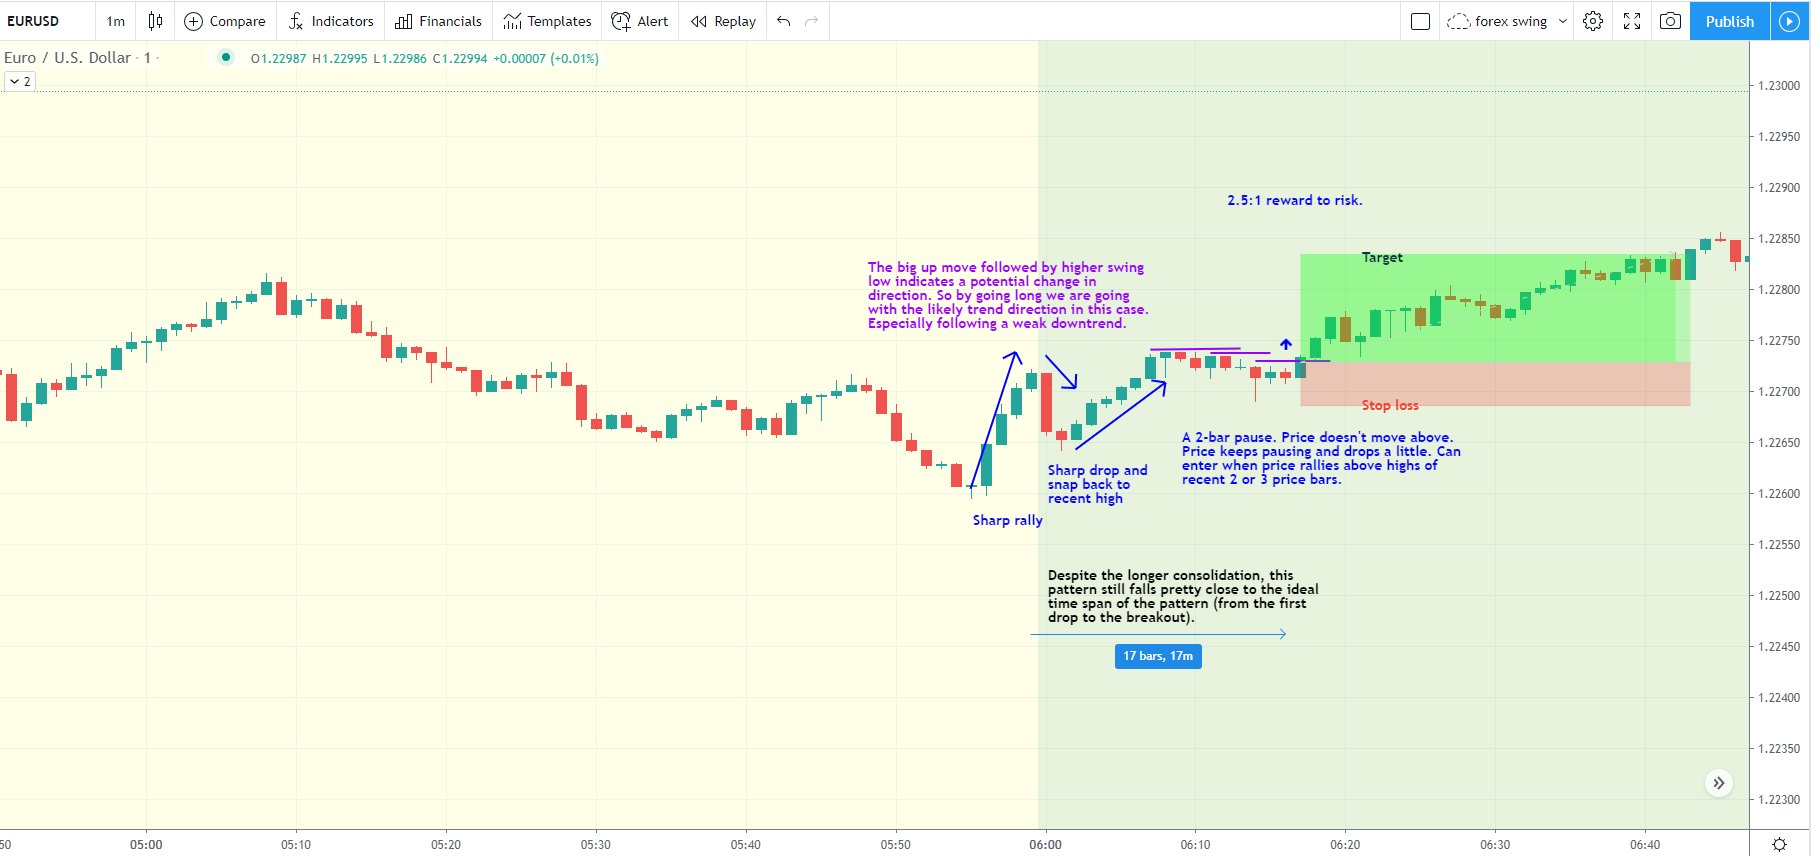 SNAP-back eurusd day trading strategy during an uptrend